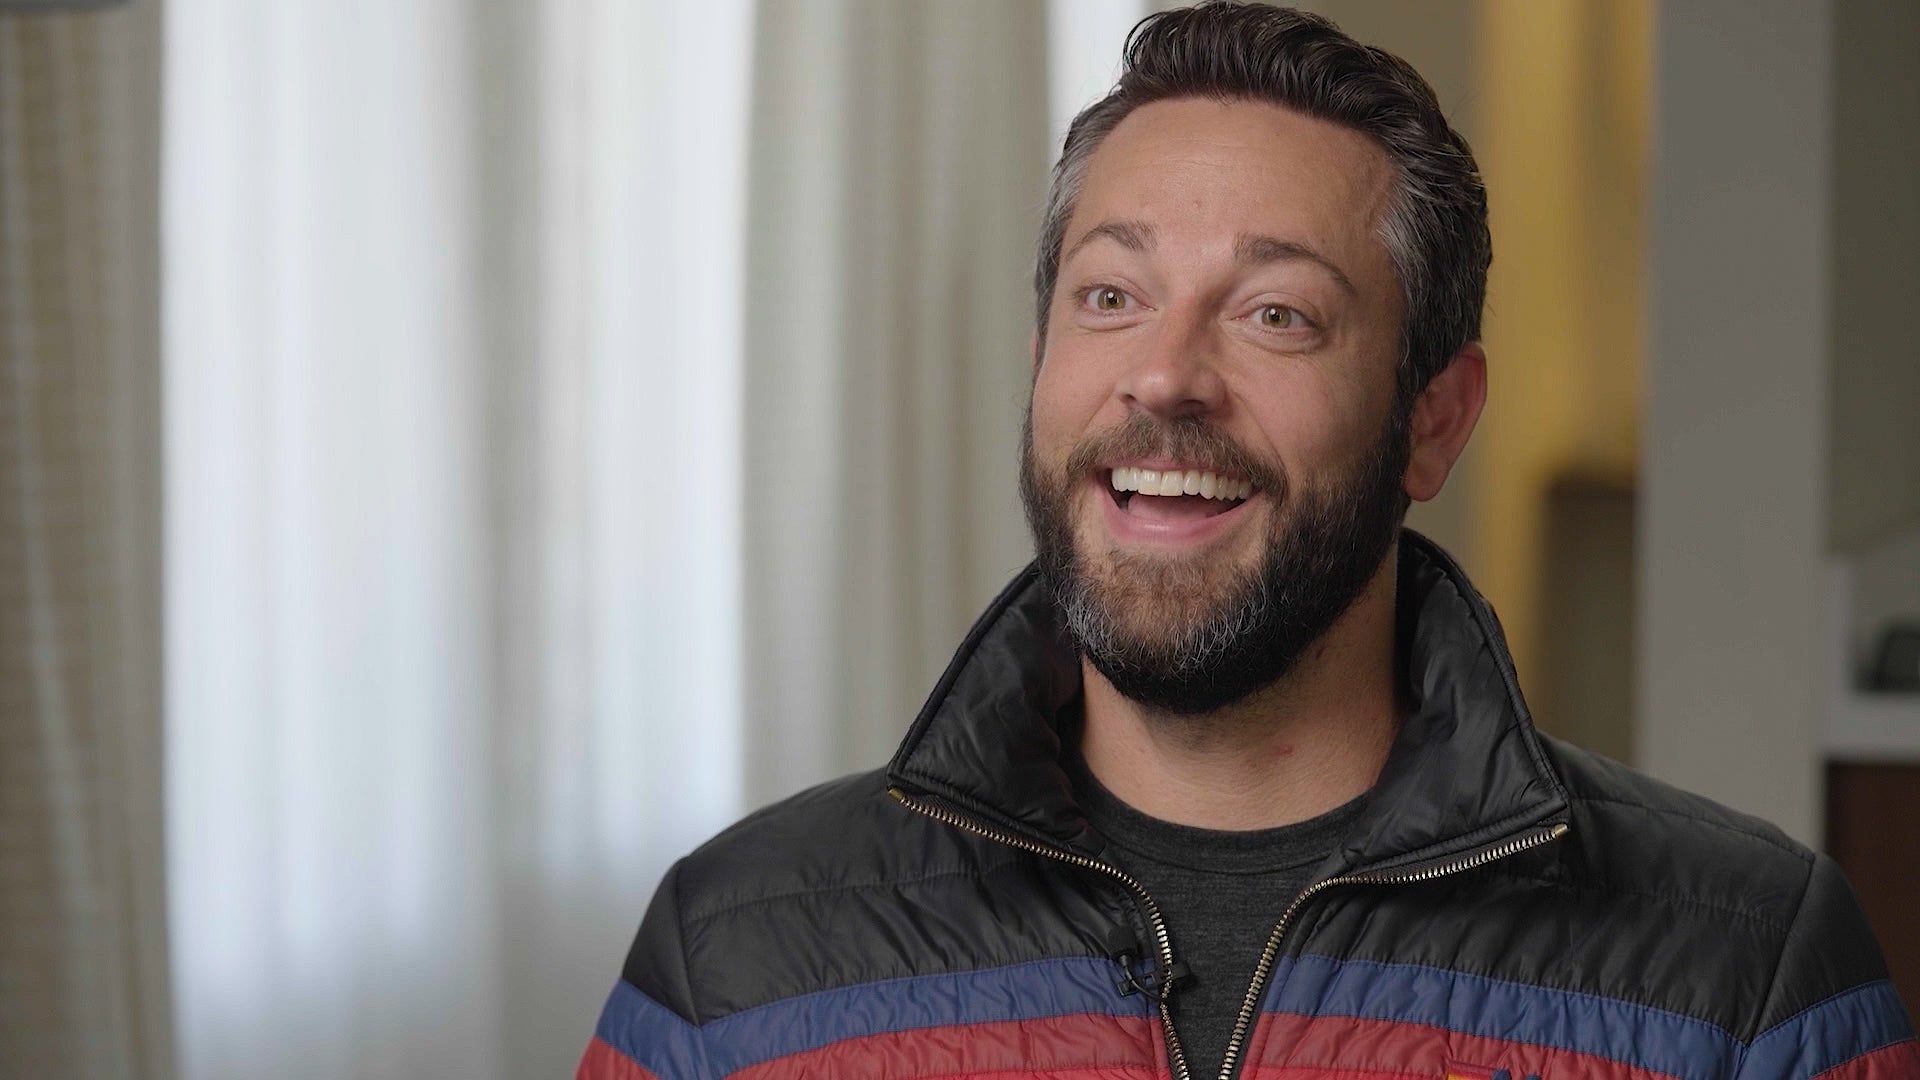 Is the Grace of God': How Actor Zachary Levi Went from Suicidal to Superhero | CBN News